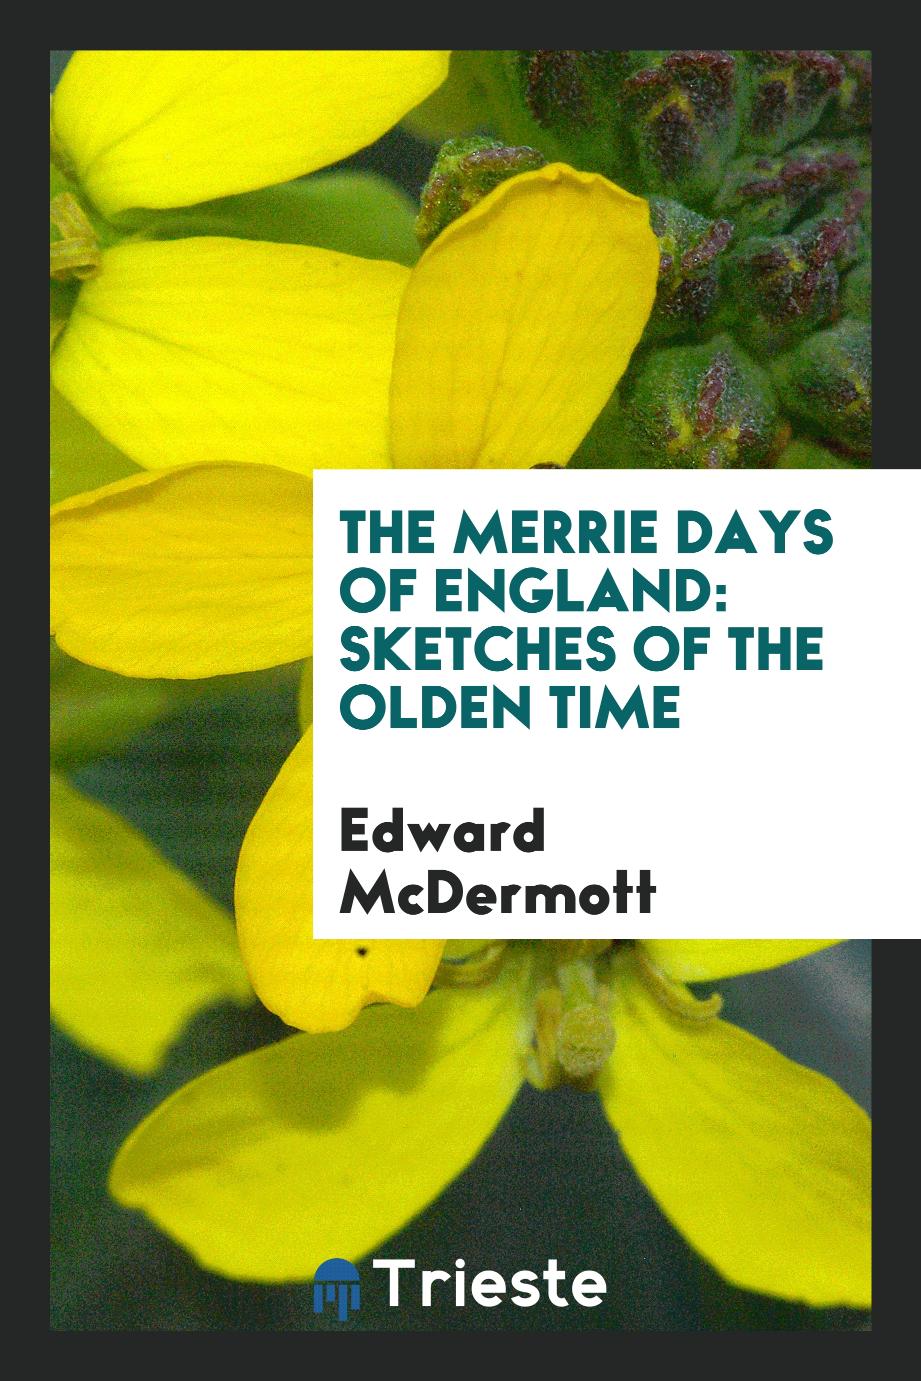 The Merrie Days of England: Sketches of the Olden Time